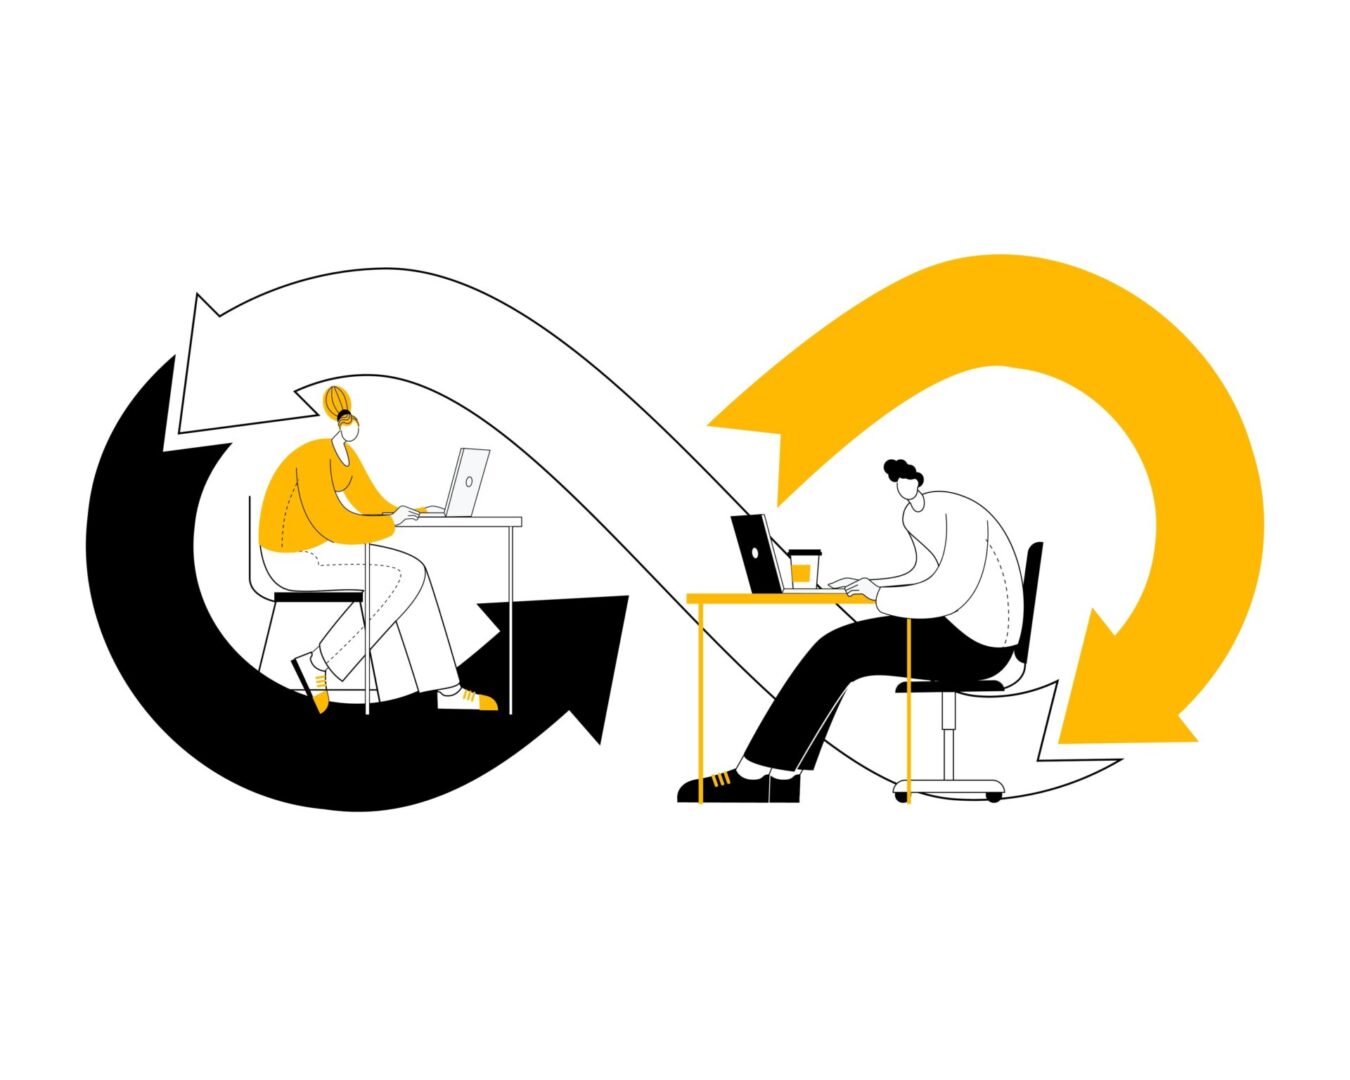 Collaboration in DevOps is illustrated by two team members working together in front of the DevOps infinity logo.